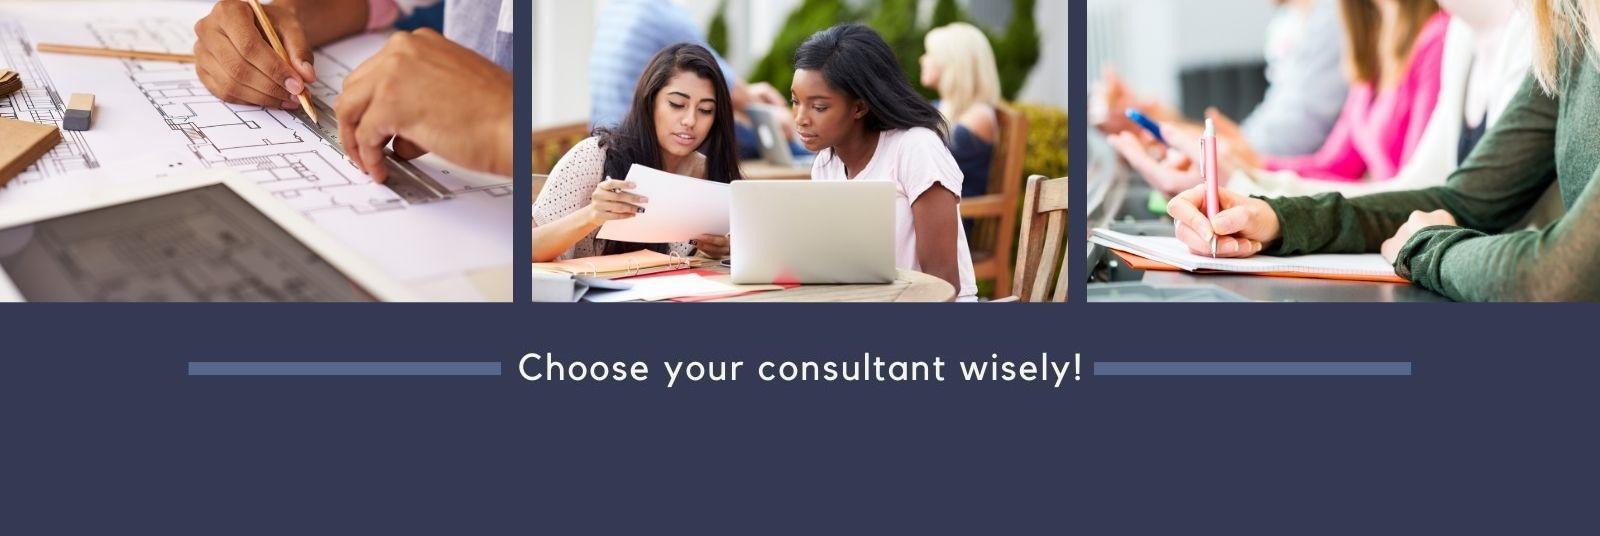 study abroad consultancies should be chosen wisely